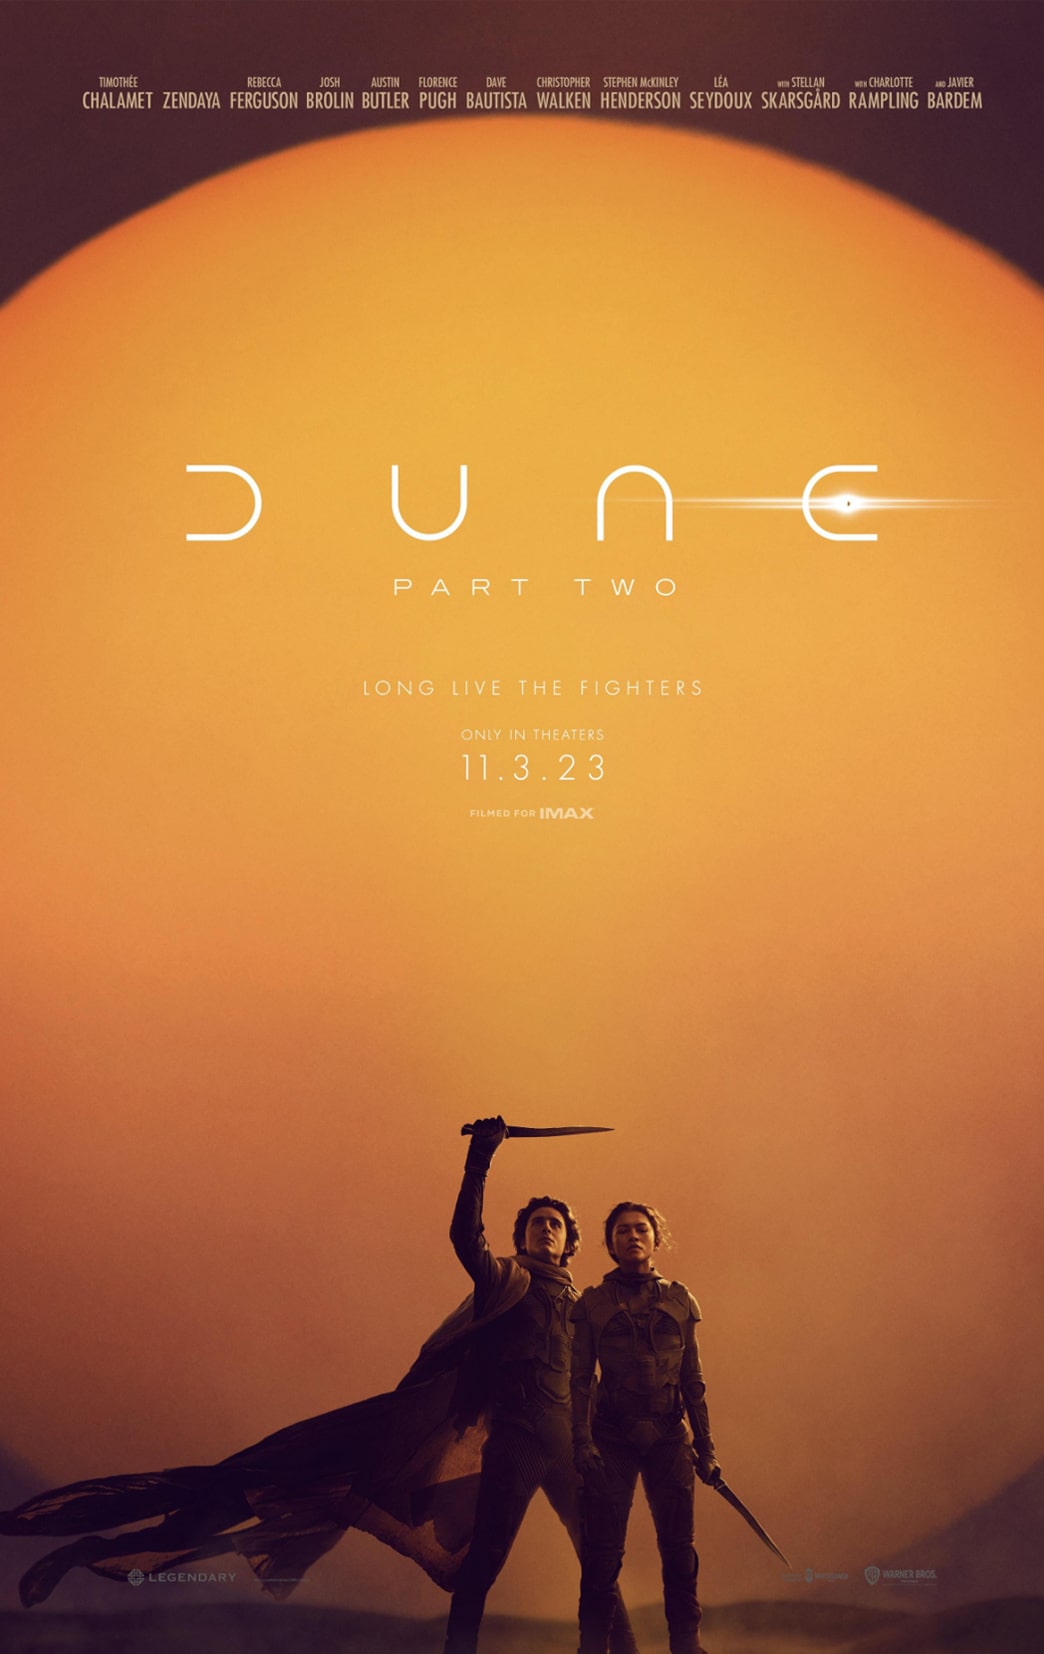 A poster for dune with two people standing in front of an orange sun.